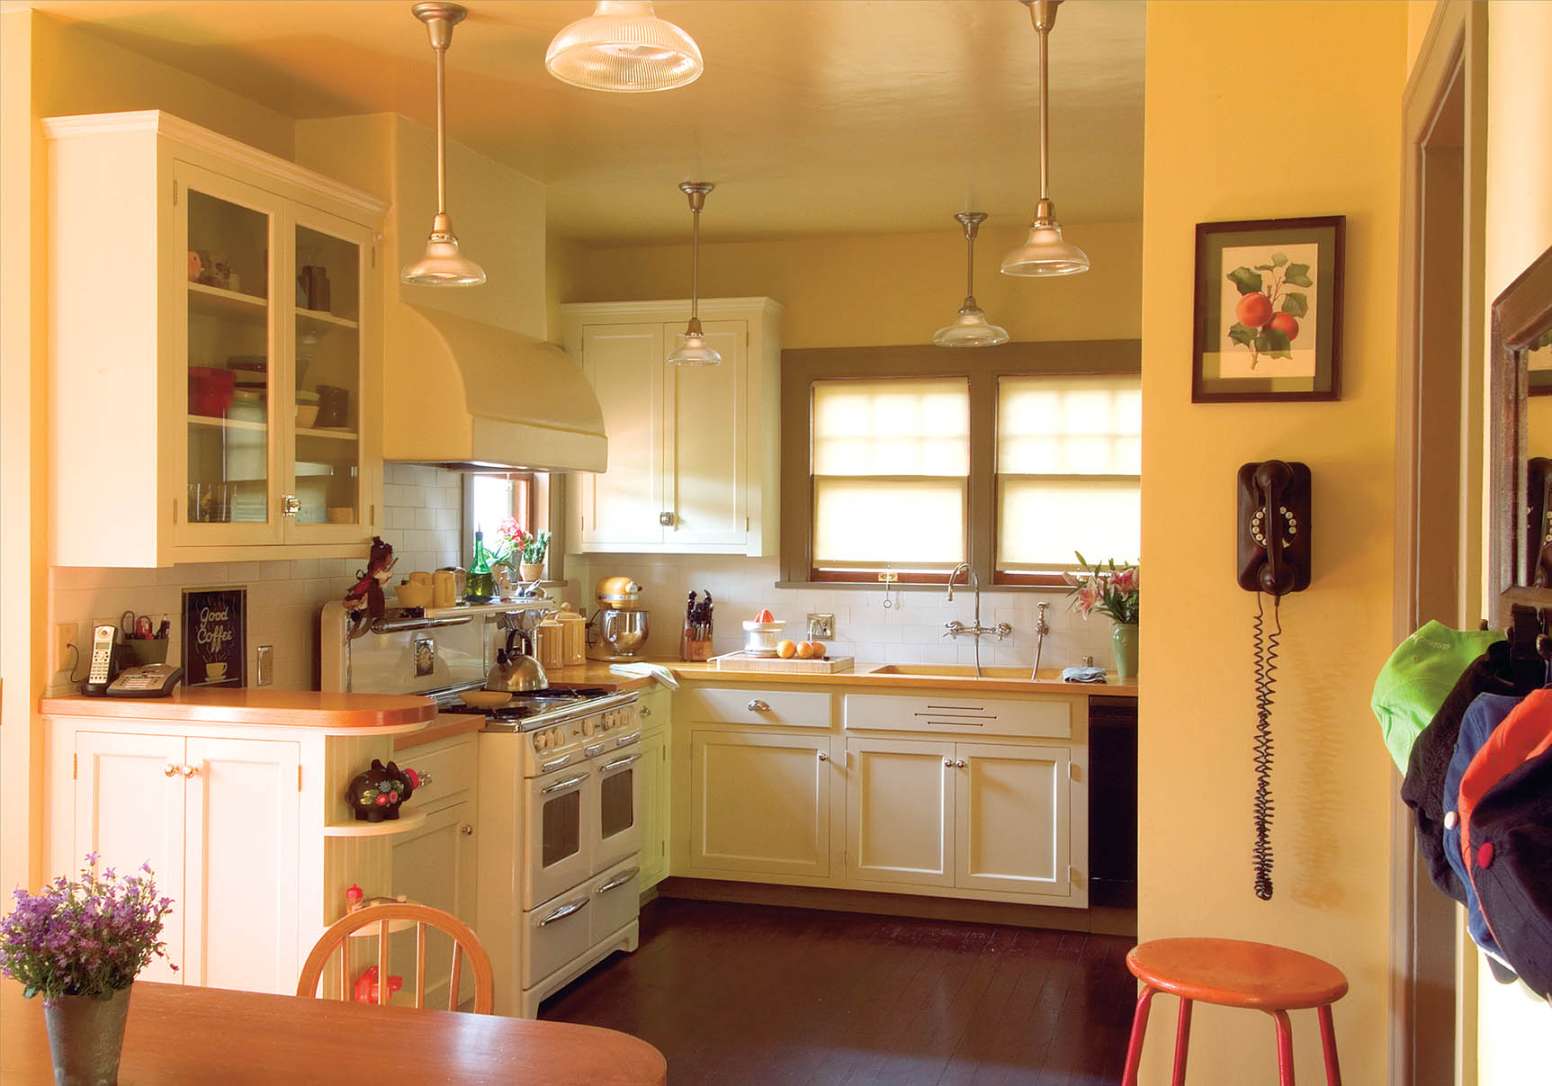 Bungalow Kitchens: Changing With The Times  American Bungalow